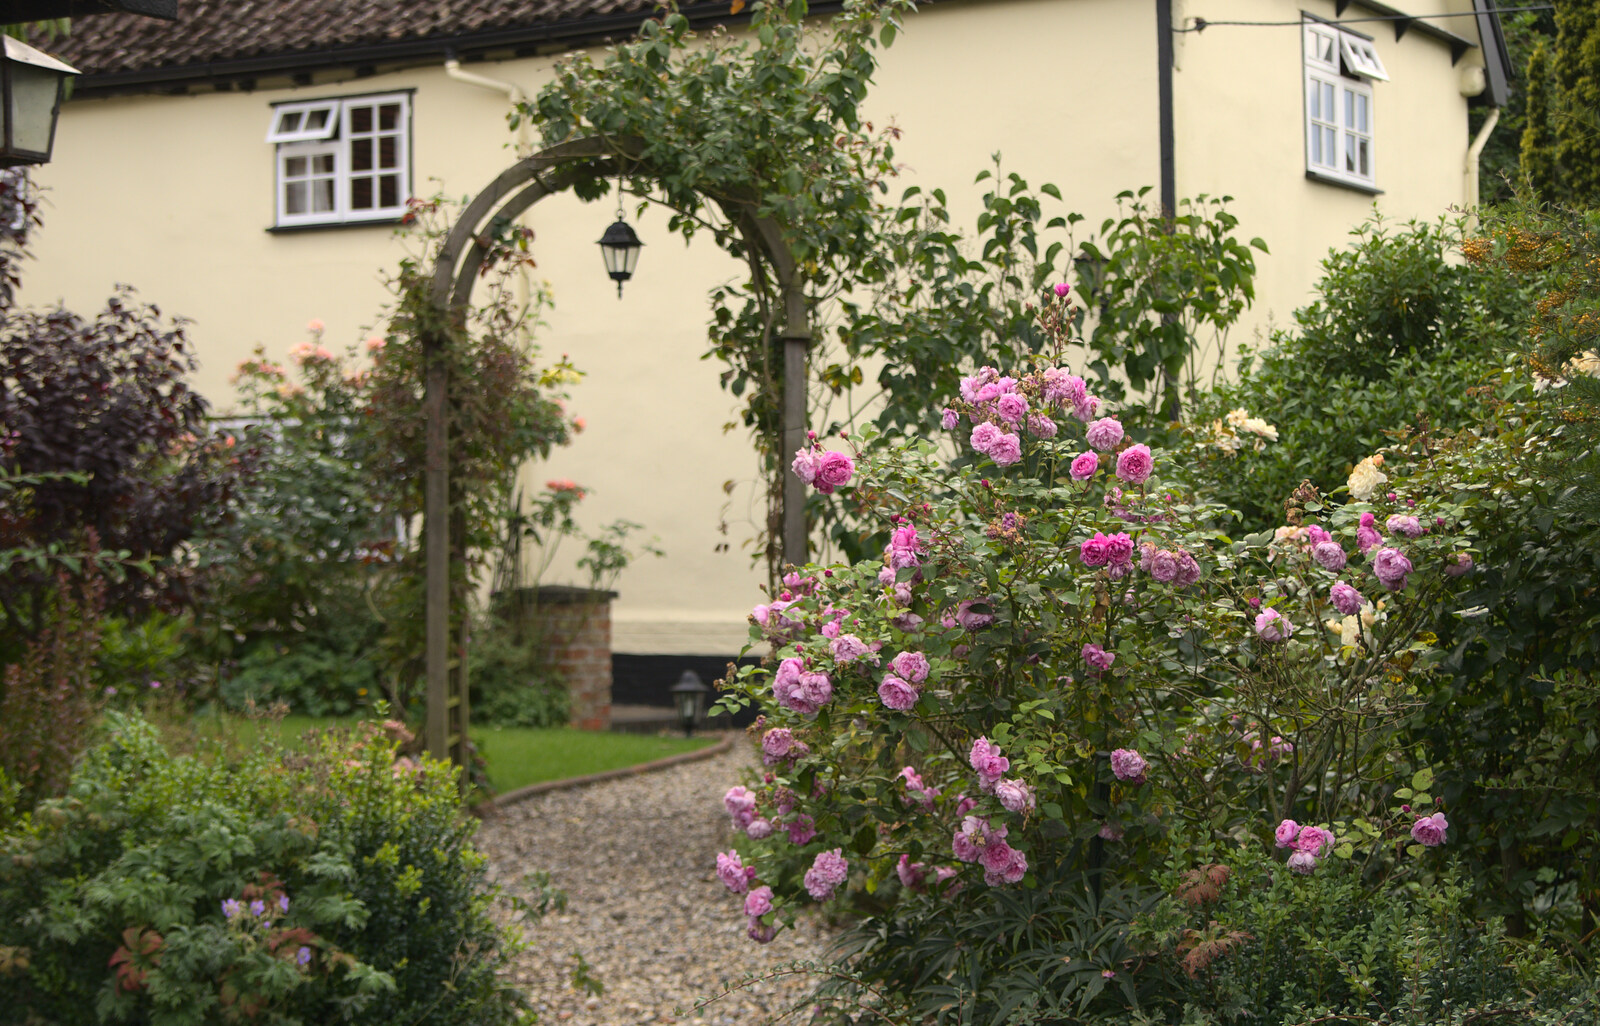 Summer roses from The Oaksmere, and the Gislingham Flower Festival, Suffolk - 24th August 2014